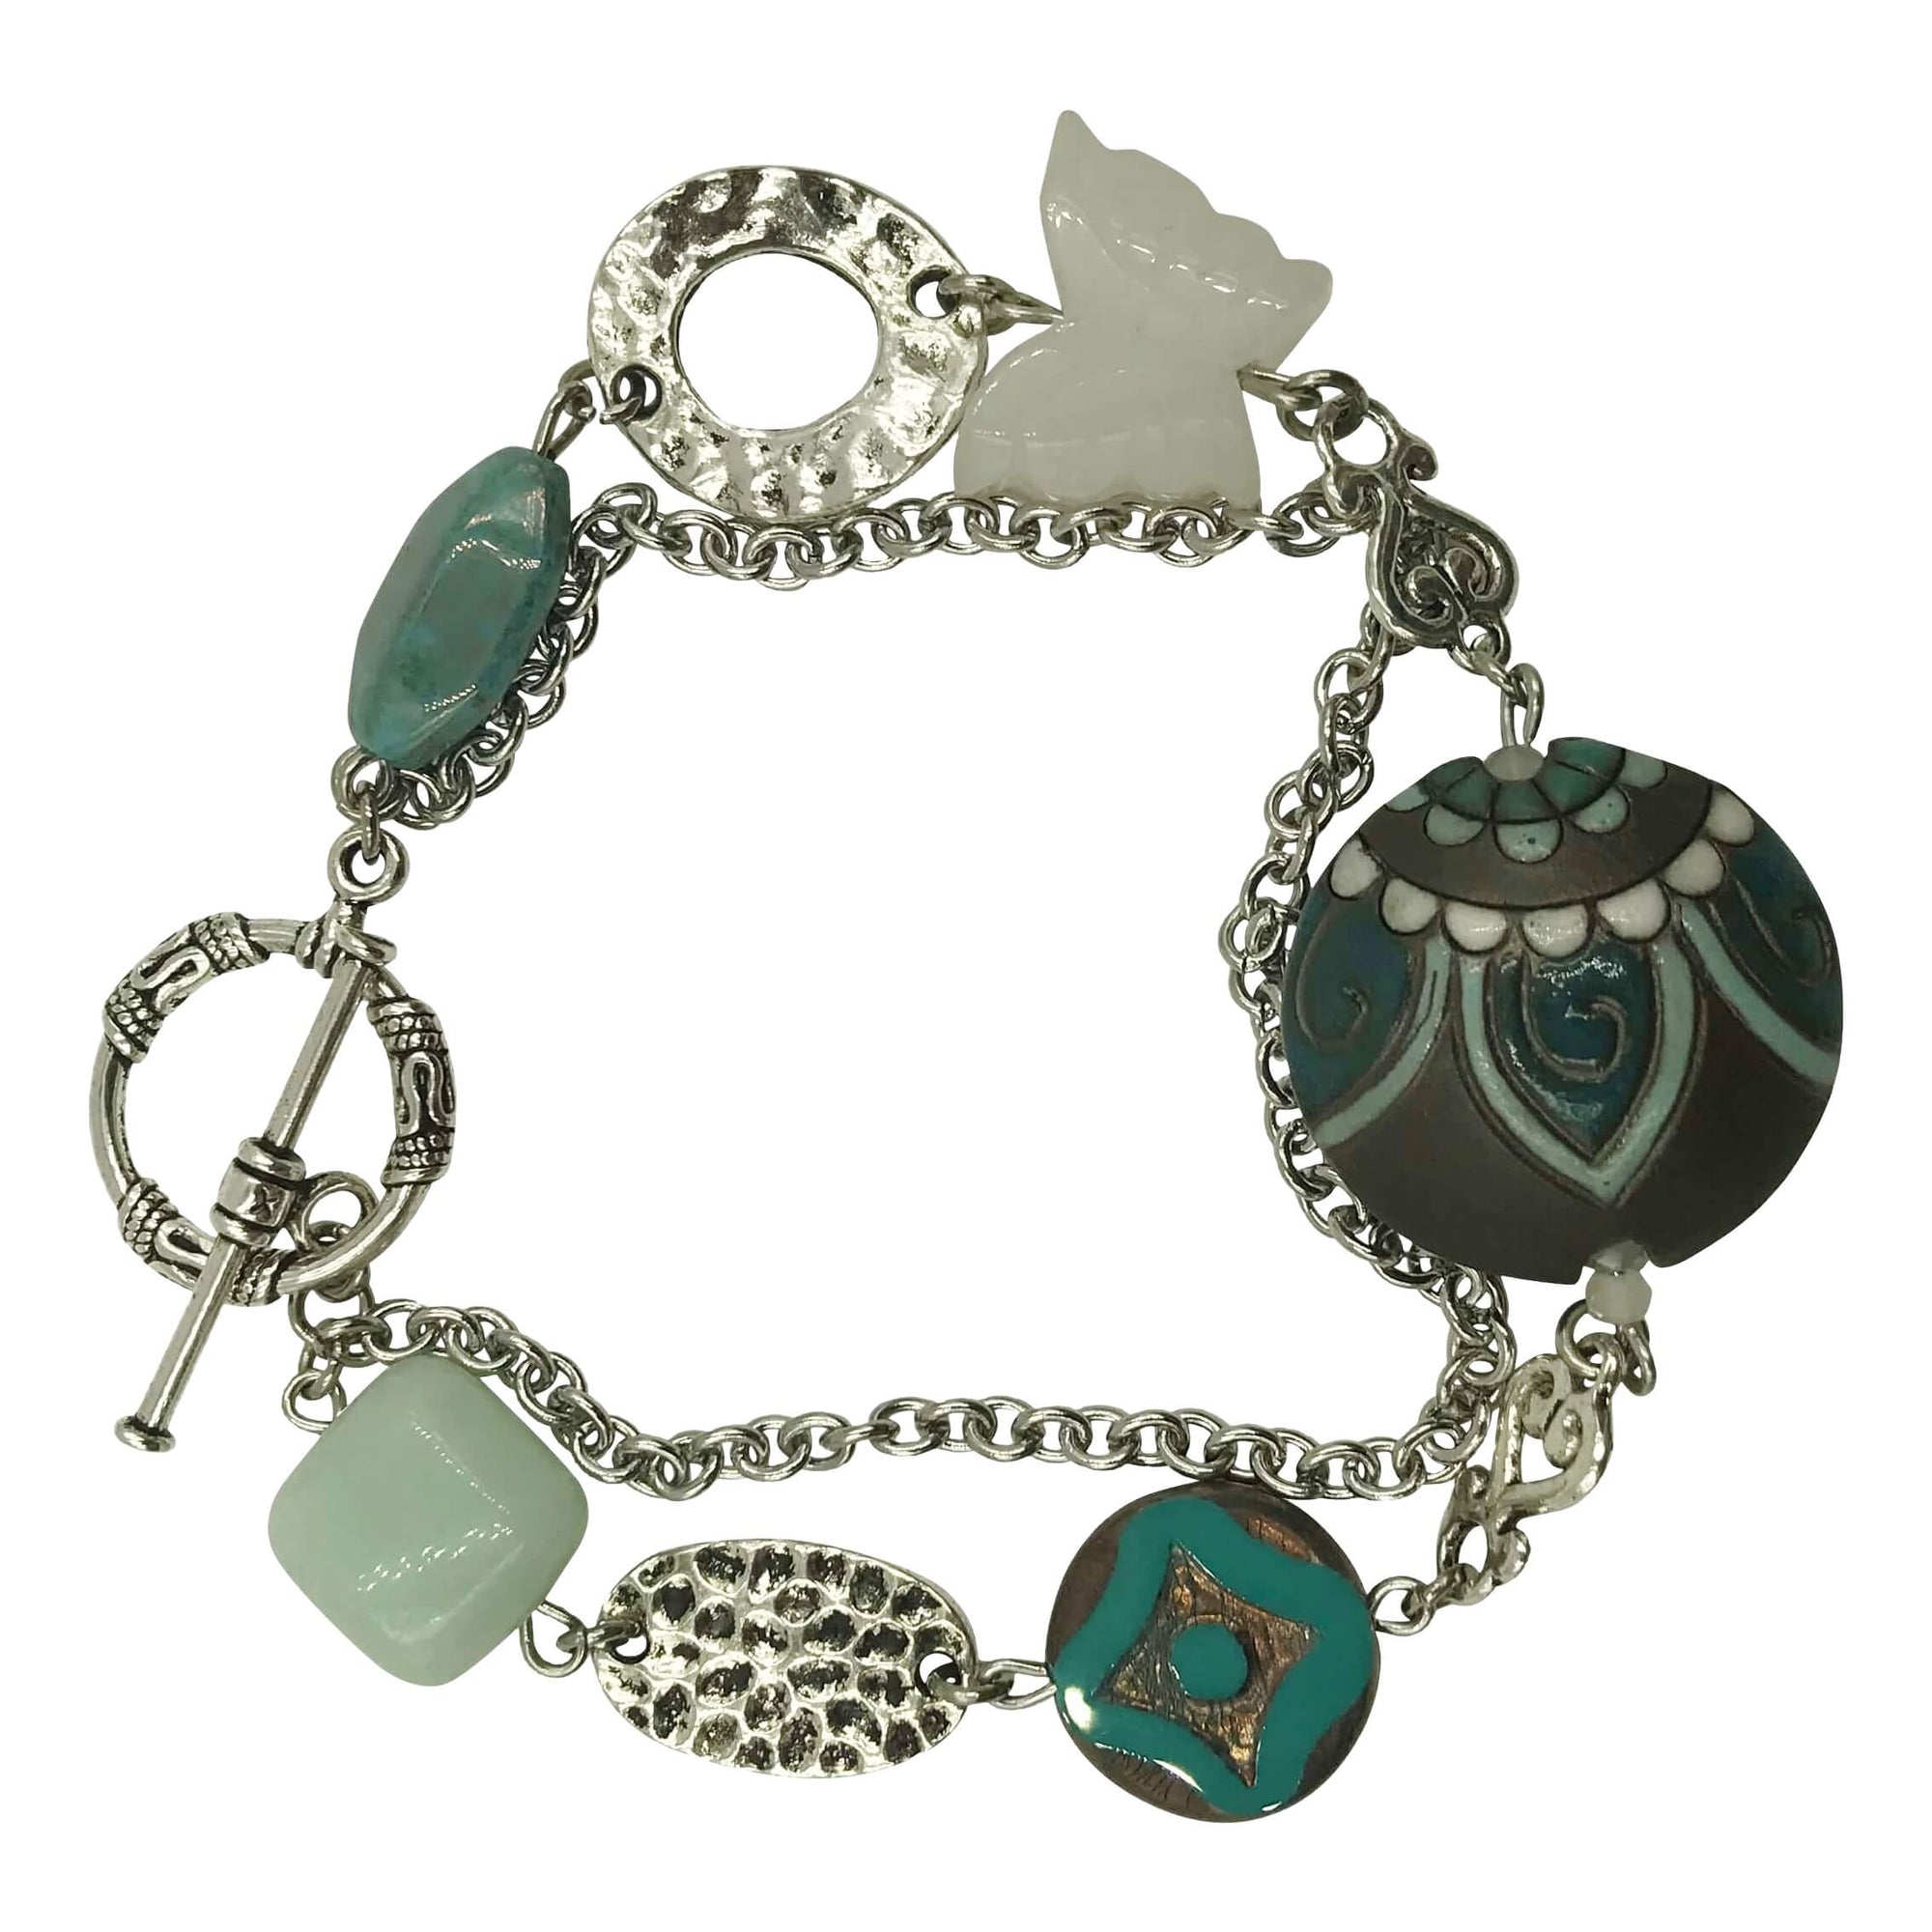 Brown Paisley Print Focal Bracelet with Stainless Steel Chain and Amazonite Stone-Bracelets- Creative Jewelry by Marcia